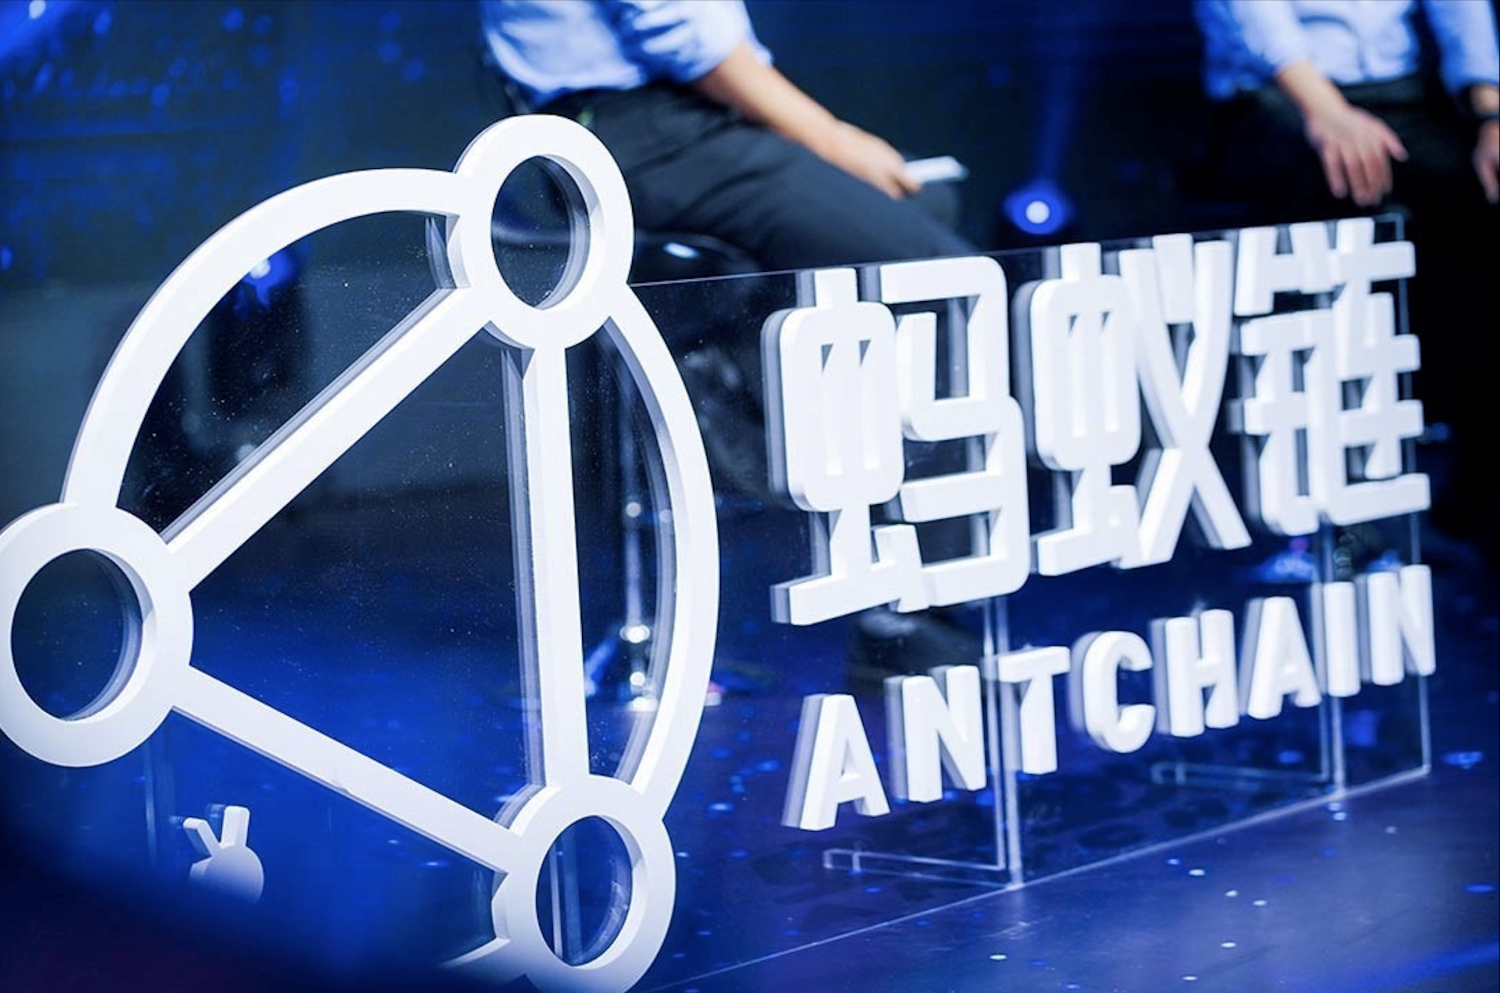 Ant-group-claims-100m-digital-assets-are-uploaded-to-its-blockchain-daily